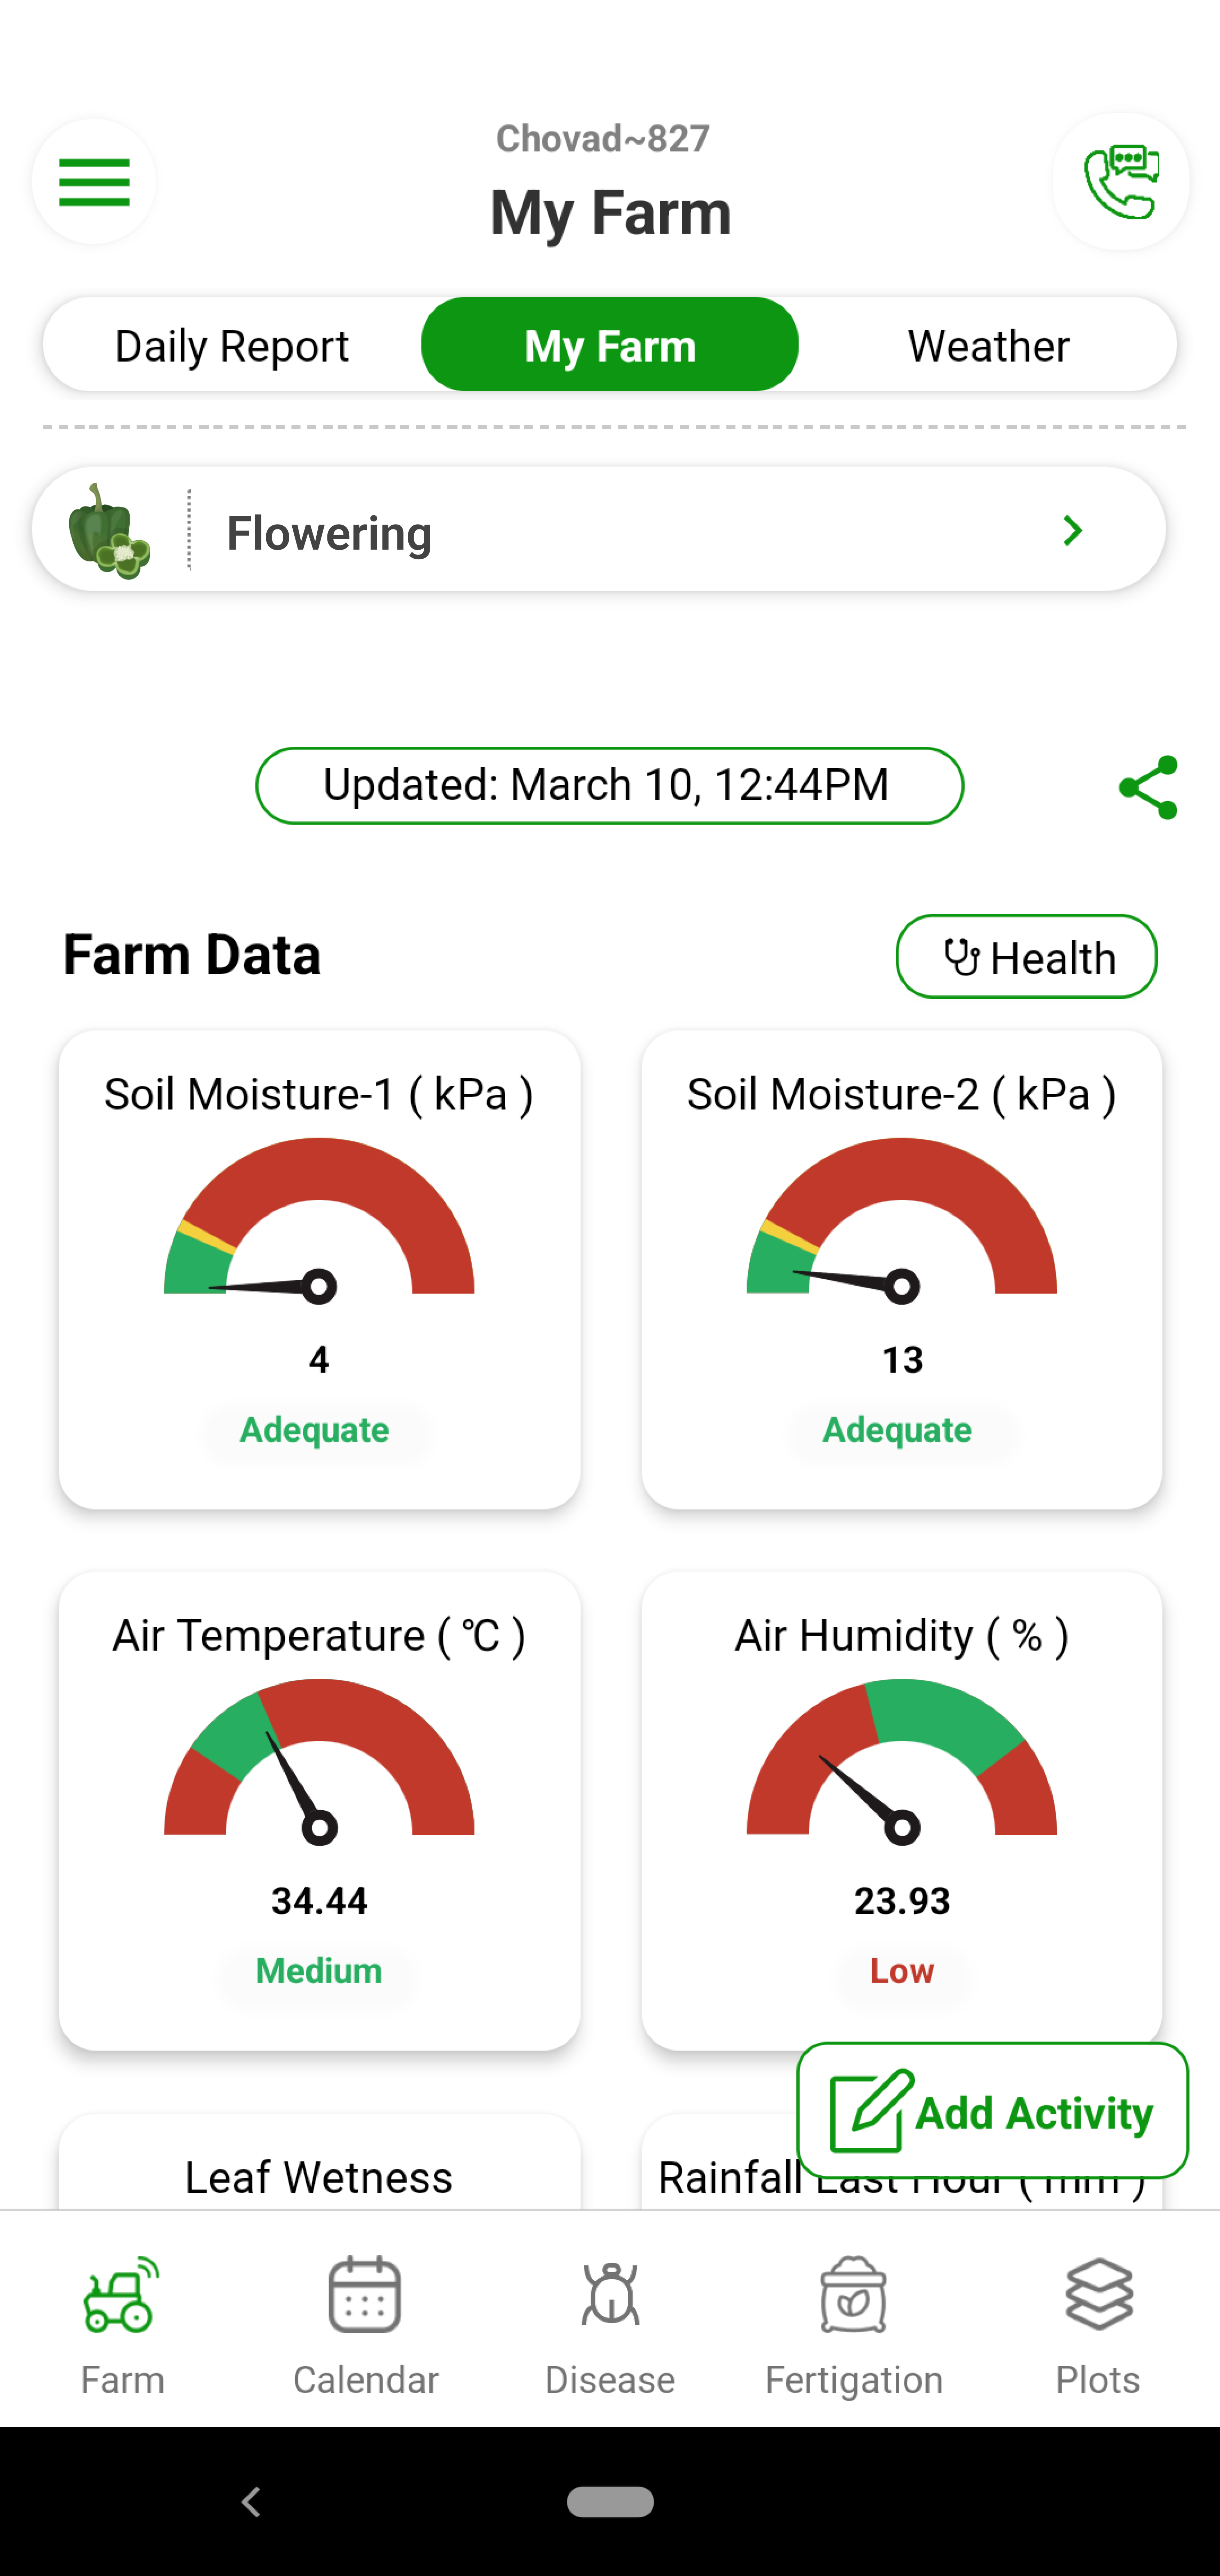 Fyllo device installed at your farm monitors your farm 24*7 and captures 12 critical parameters in real time. You get this data on your mobile and dashboard in real time. You get to monitor where the crop is getting enough sunlight, proper temperature or humidity.